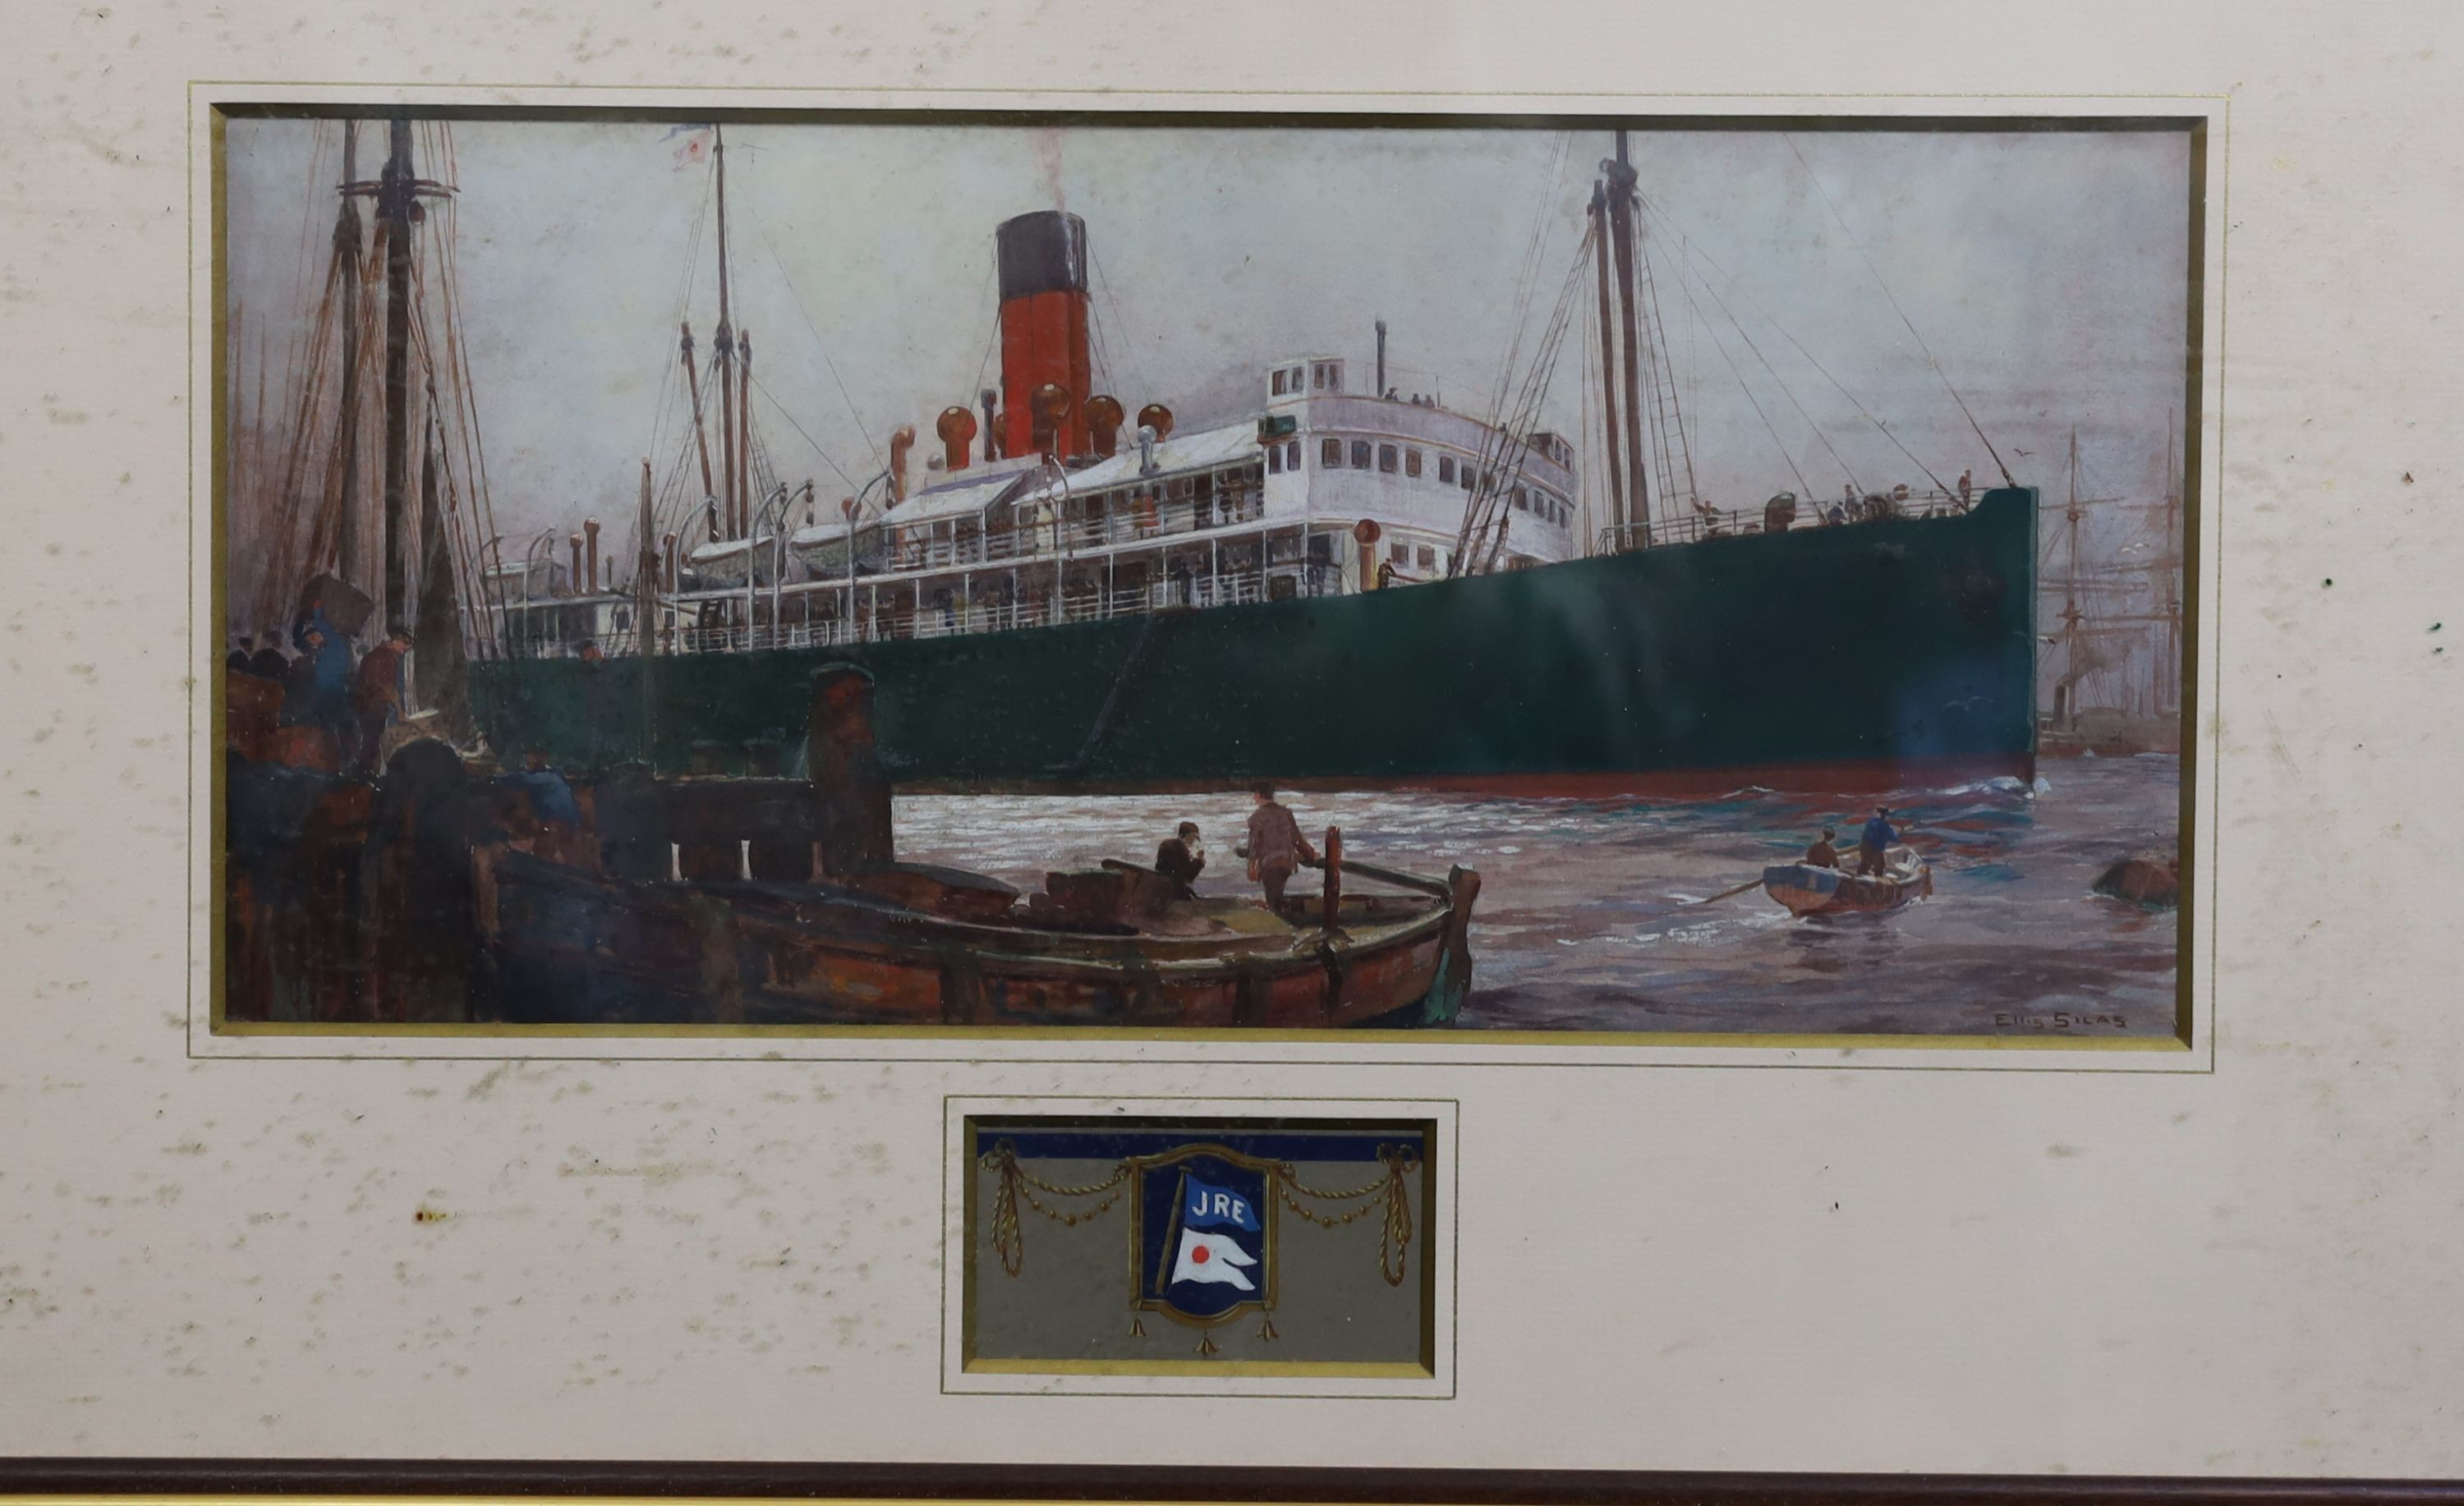 Ellis Silas (1885-1972), Liner entering harbour with remarque sketch of a coat of arms initialled JRE, gouache and watercolour, 23 x 49cm